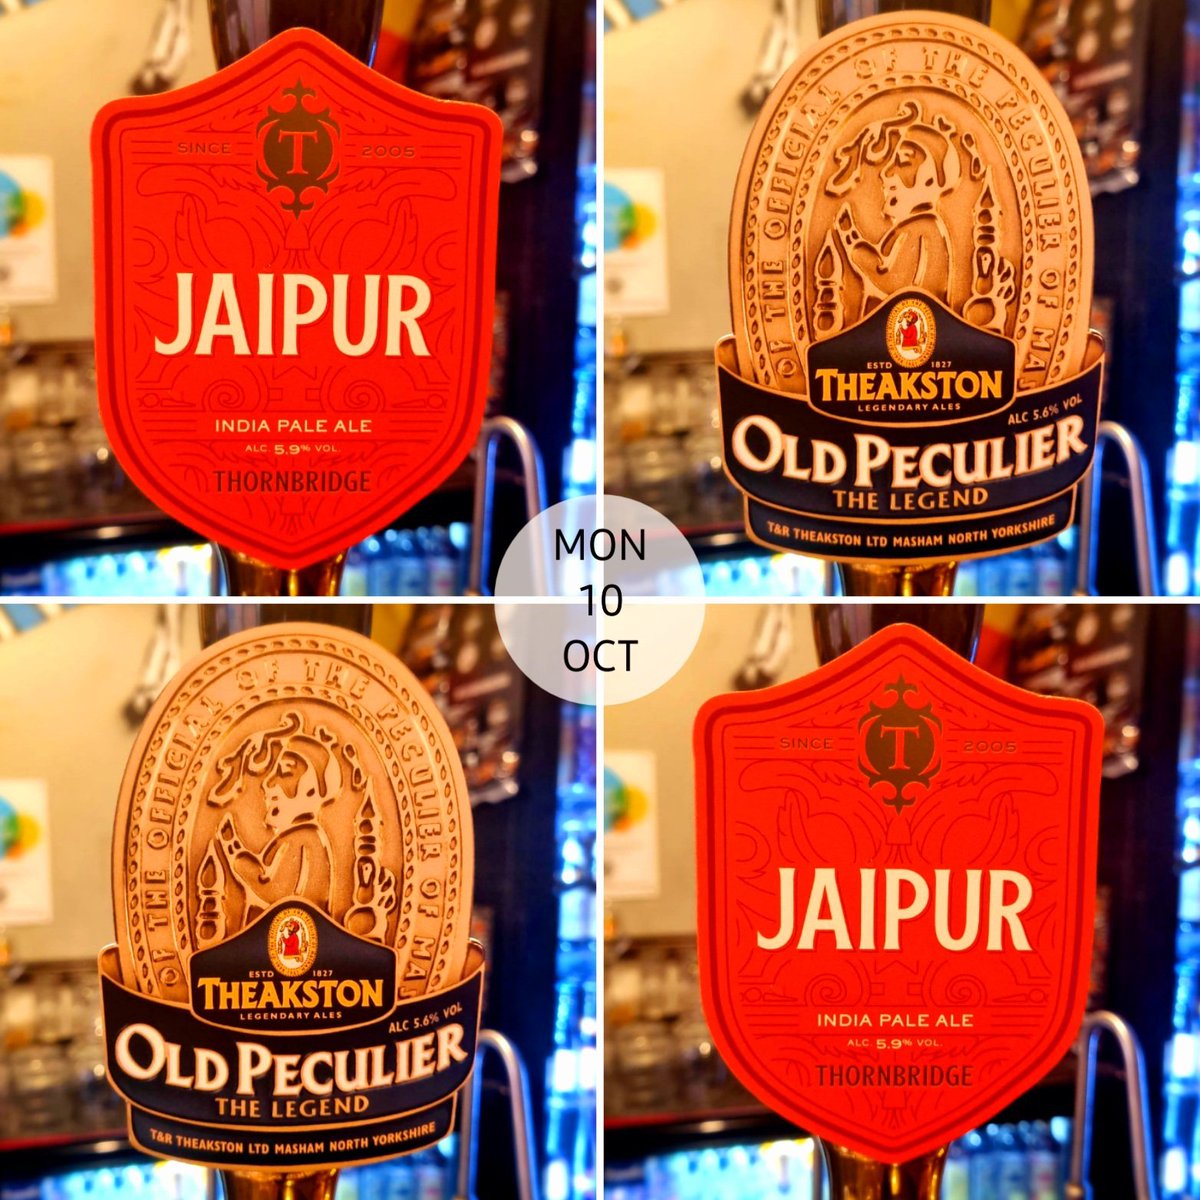 What a way to start the week - two legendary ales on the bar at The Golden Smog. Pump 3 @thornbridge Jaipur IPA 5.9% Pump 4 @Theakston1827 Old Peculier 5.6% Good start, eh, Smoggies!? Sunshine and smashing ales!